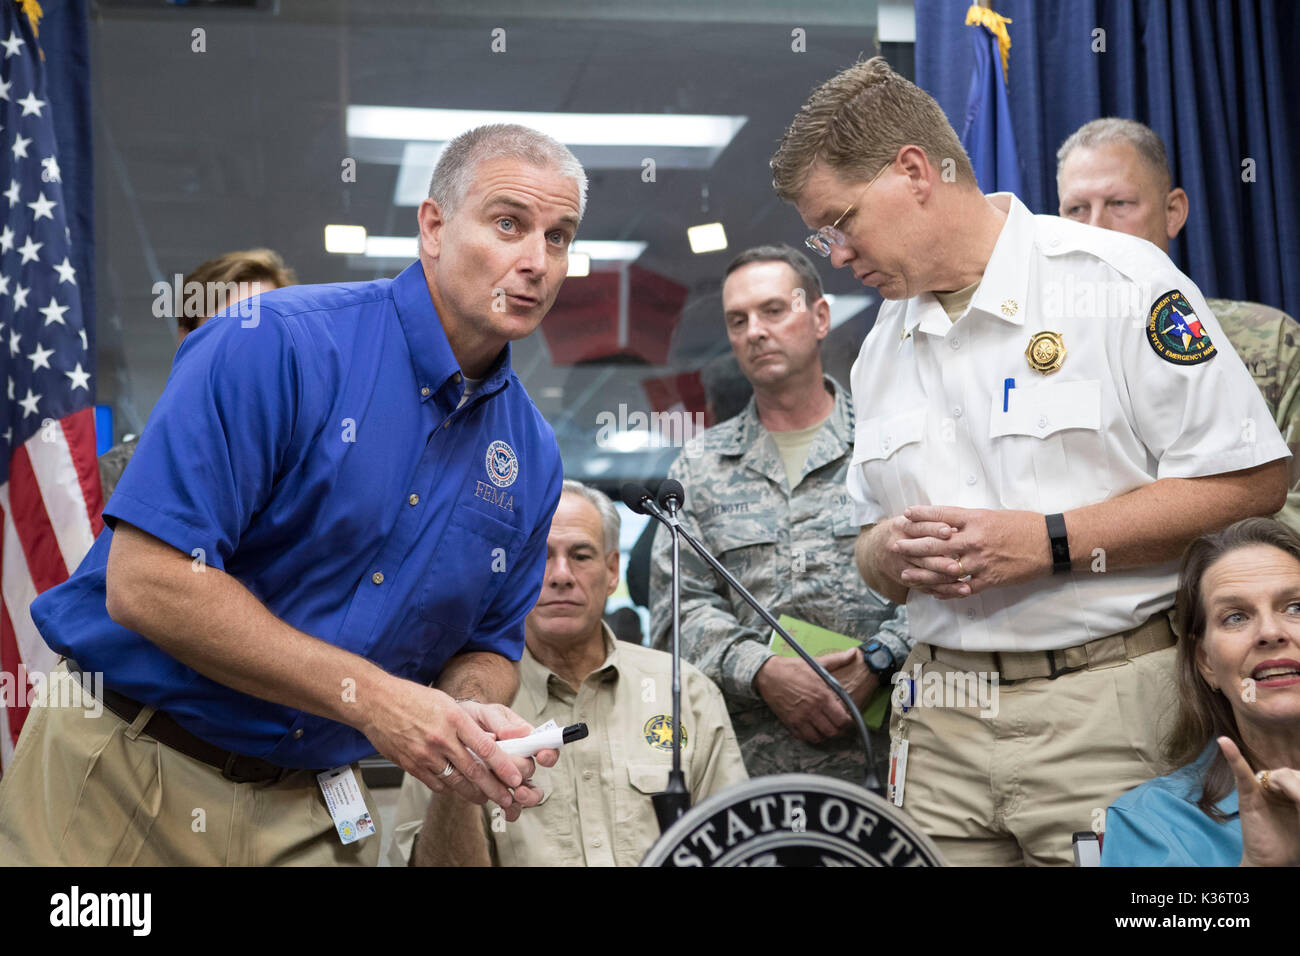 Austin, Texas USA Sept. 1, 2017: FEMA Region 6 Administrator Tony Robinson, l, speaks as Texas Gov. Greg Abbott and emergency officials continue response to extensive Hurricane Harvey damage at the Dept. of Public Safety Emergency Operations Center (EOC). Nim Kidd, chief of the Texas Division of Emergency Management, is on the right. Harvey will eventually cost the state tens of billions of dollars to recover. Credit: Bob Daemmrich/Alamy Live News Stock Photo